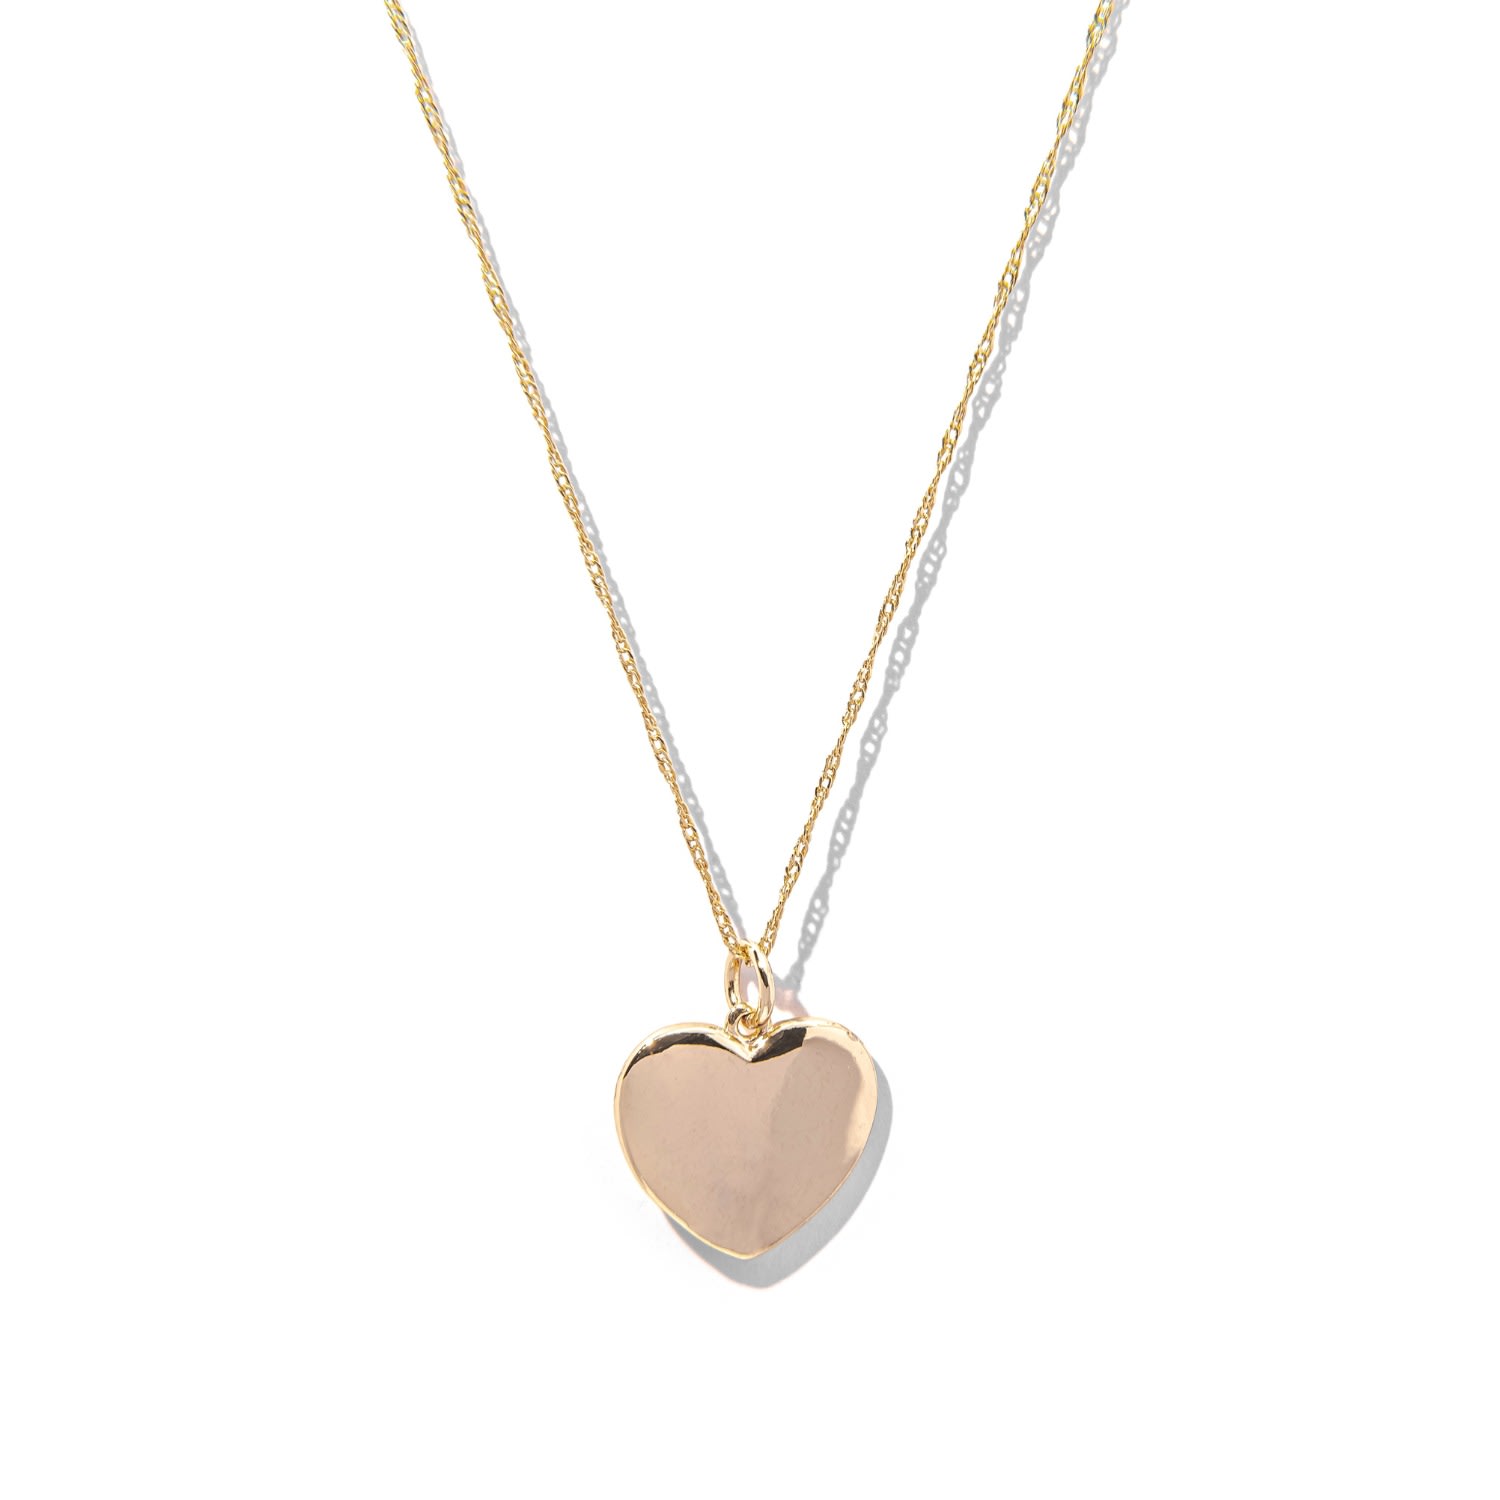 Women's Love Heart Pendant Gold Filled Necklace The Essential Jewels